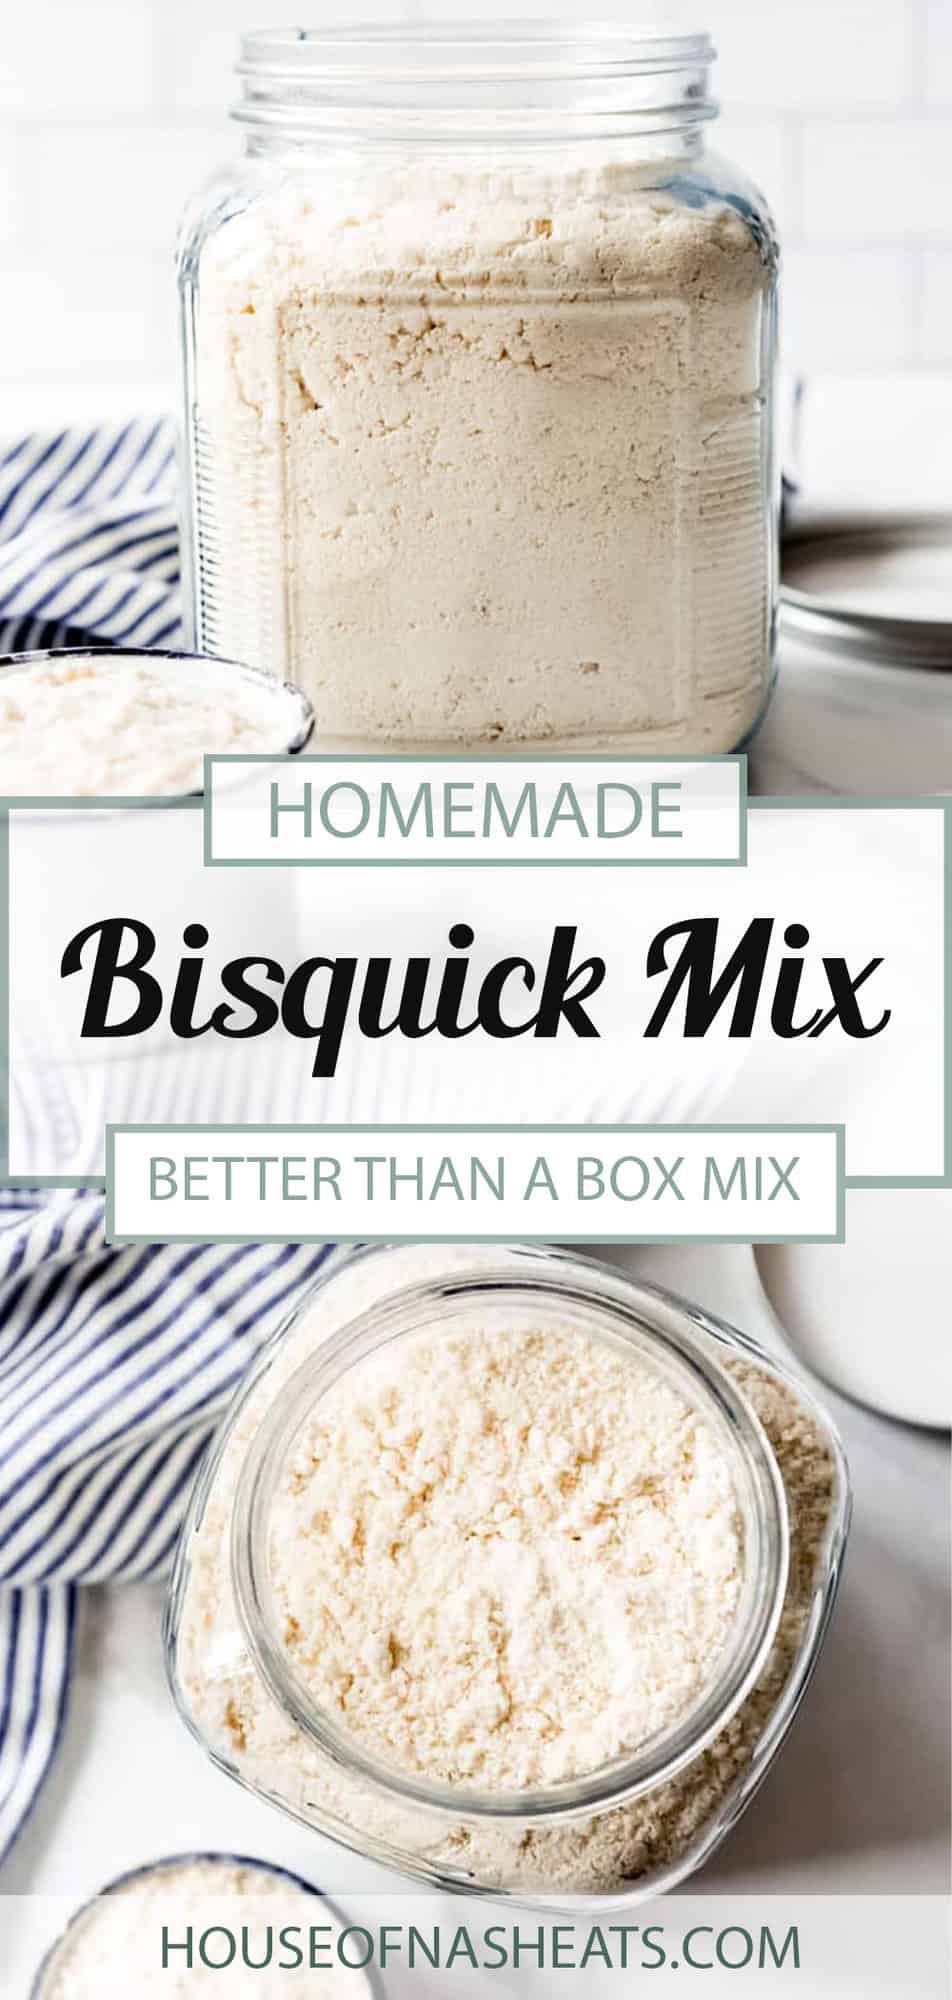 Easy Homemade Bisquick Mix (5 Minute Recipe!) - House of Nash Eats